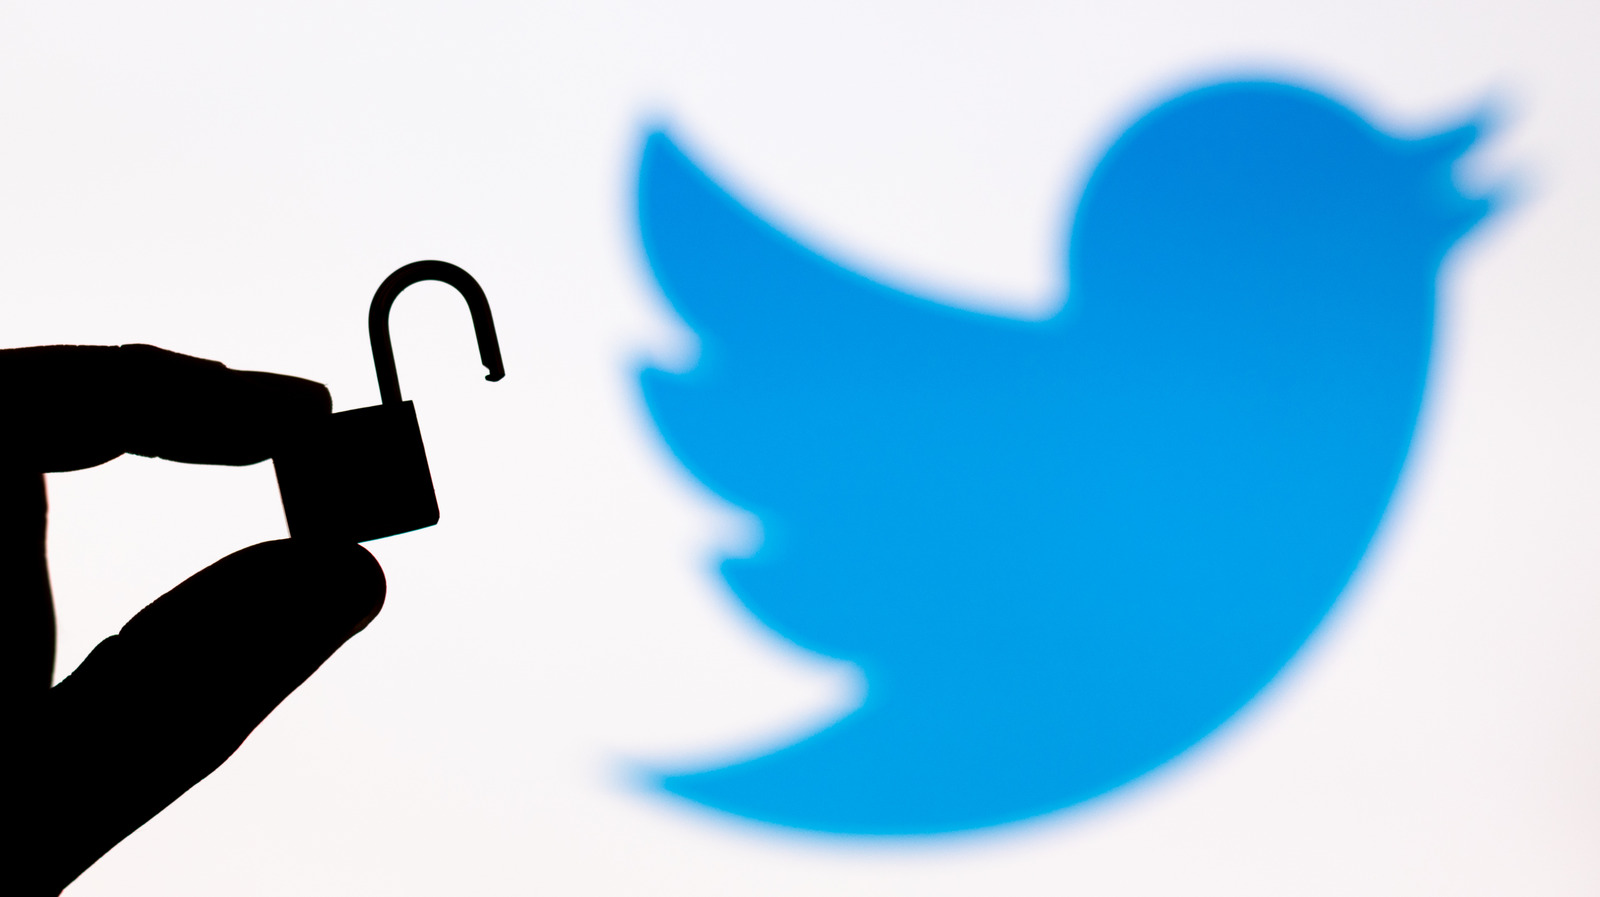 How To Archive All Of Your Twitter Data And Secure Your Account